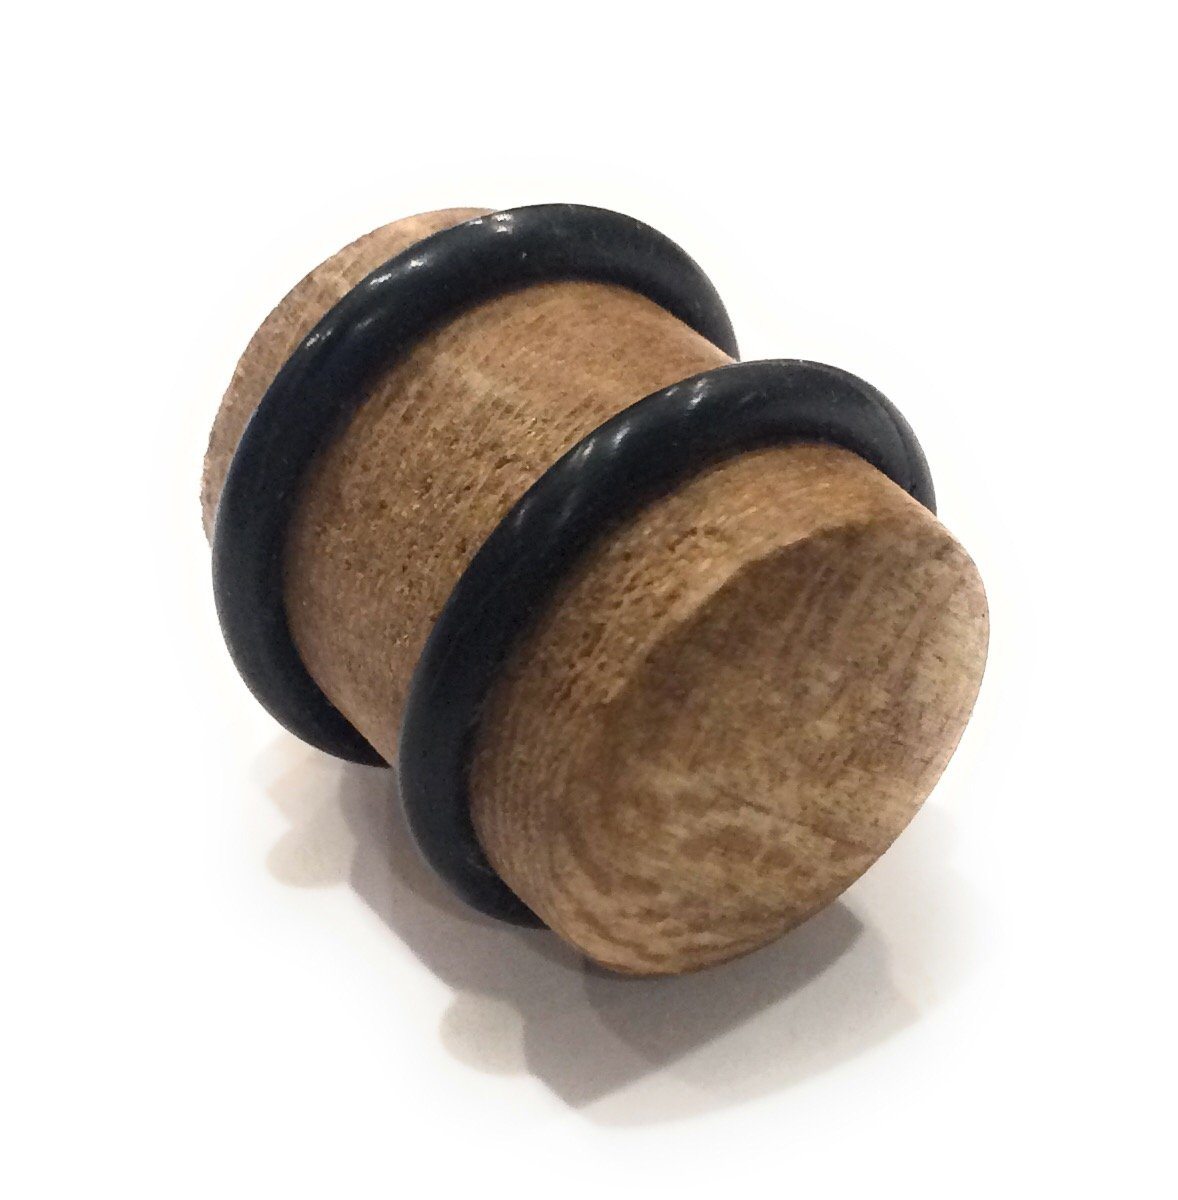 Set of 2 Tele Style Wood Barrel Custom Guitar Knobs with Rubber Grippers Guitar Control Knob Big River Hardware 